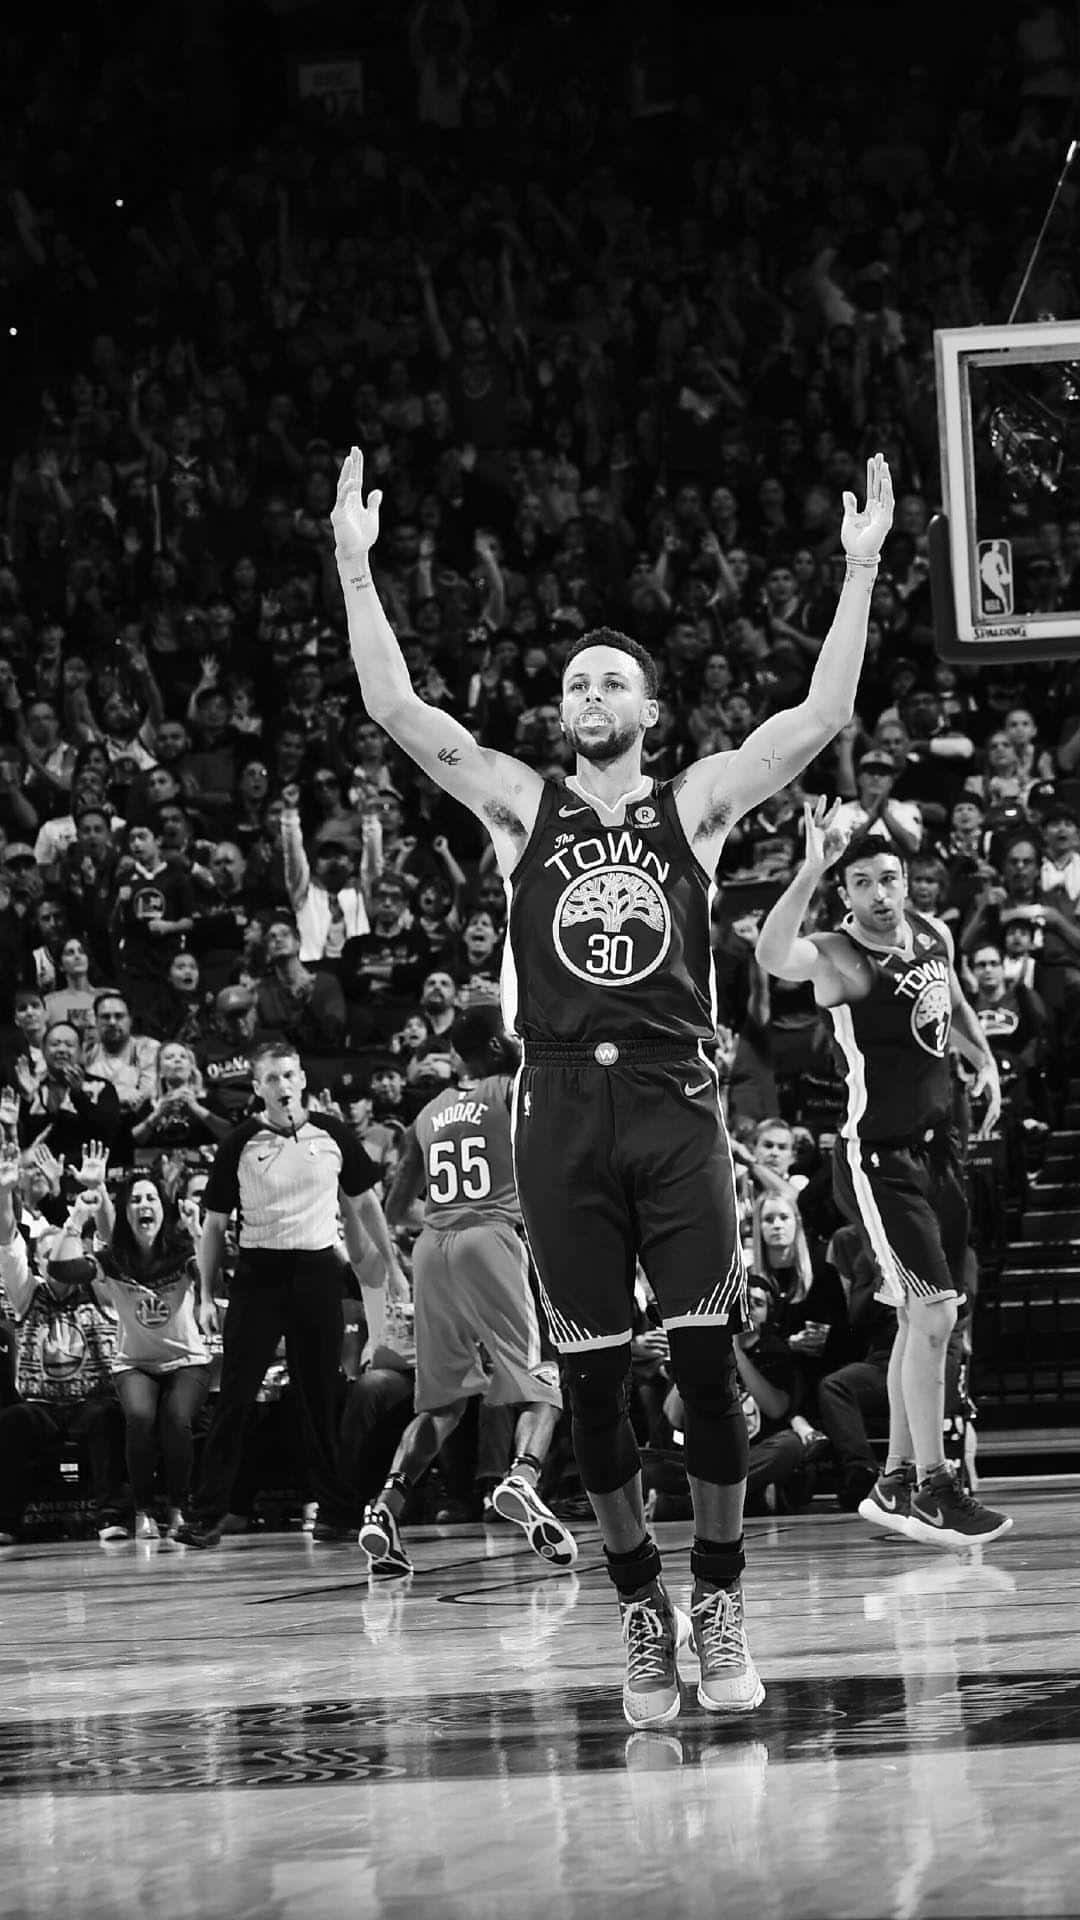 Download Basketball Aesthetic Stephen Curry Black And White Wallpaper